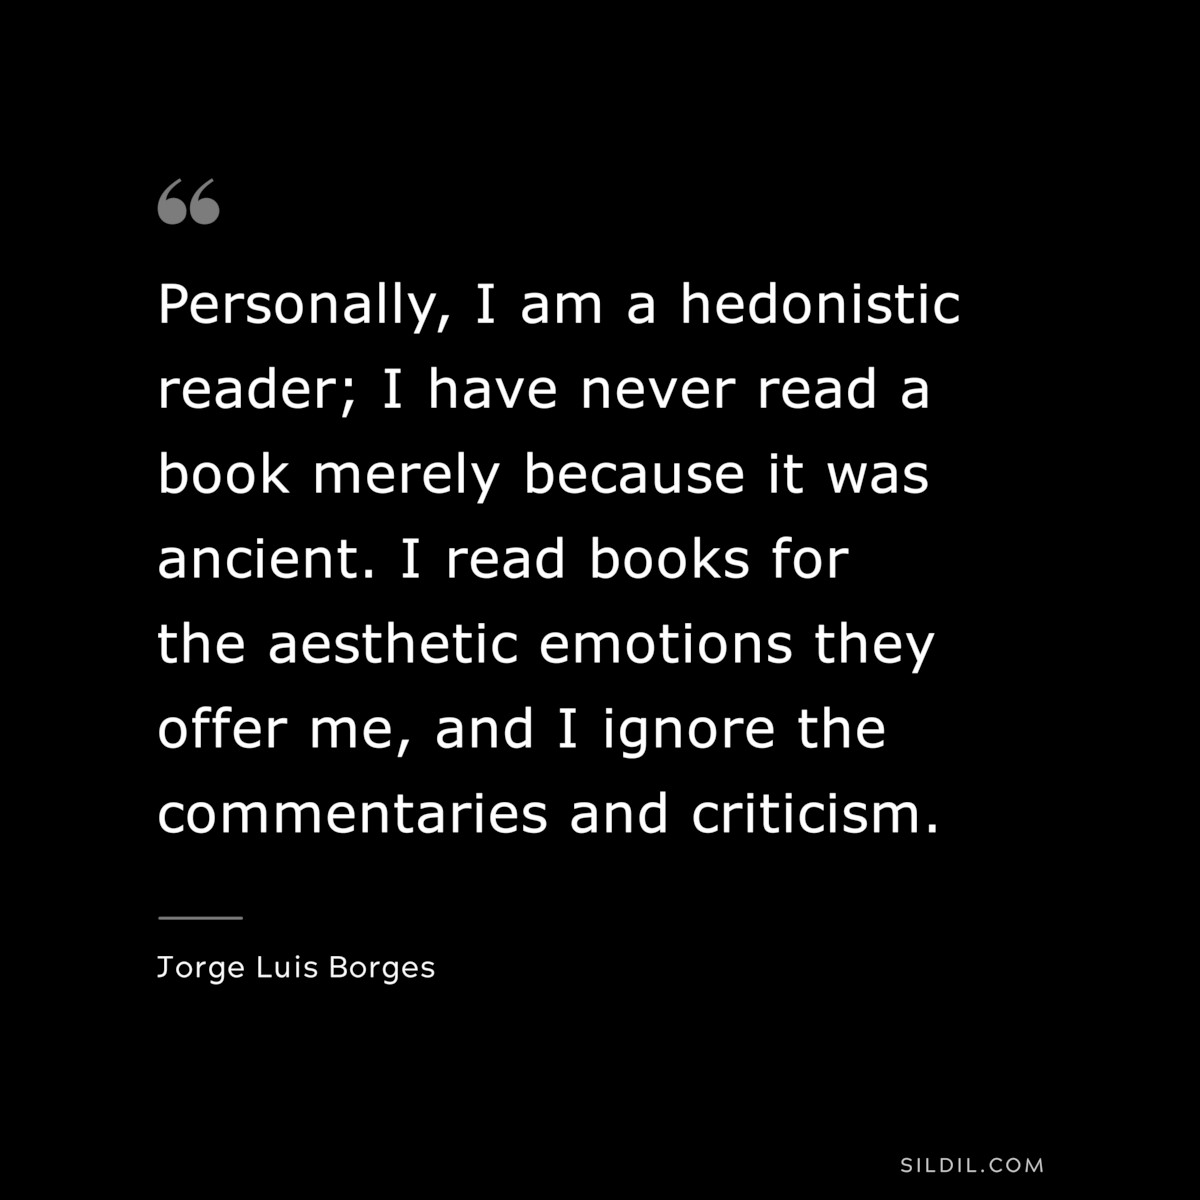 Personally, I am a hedonistic reader; I have never read a book merely because it was ancient. I read books for the aesthetic emotions they offer me, and I ignore the commentaries and criticism. ― Jorge Luis Borges